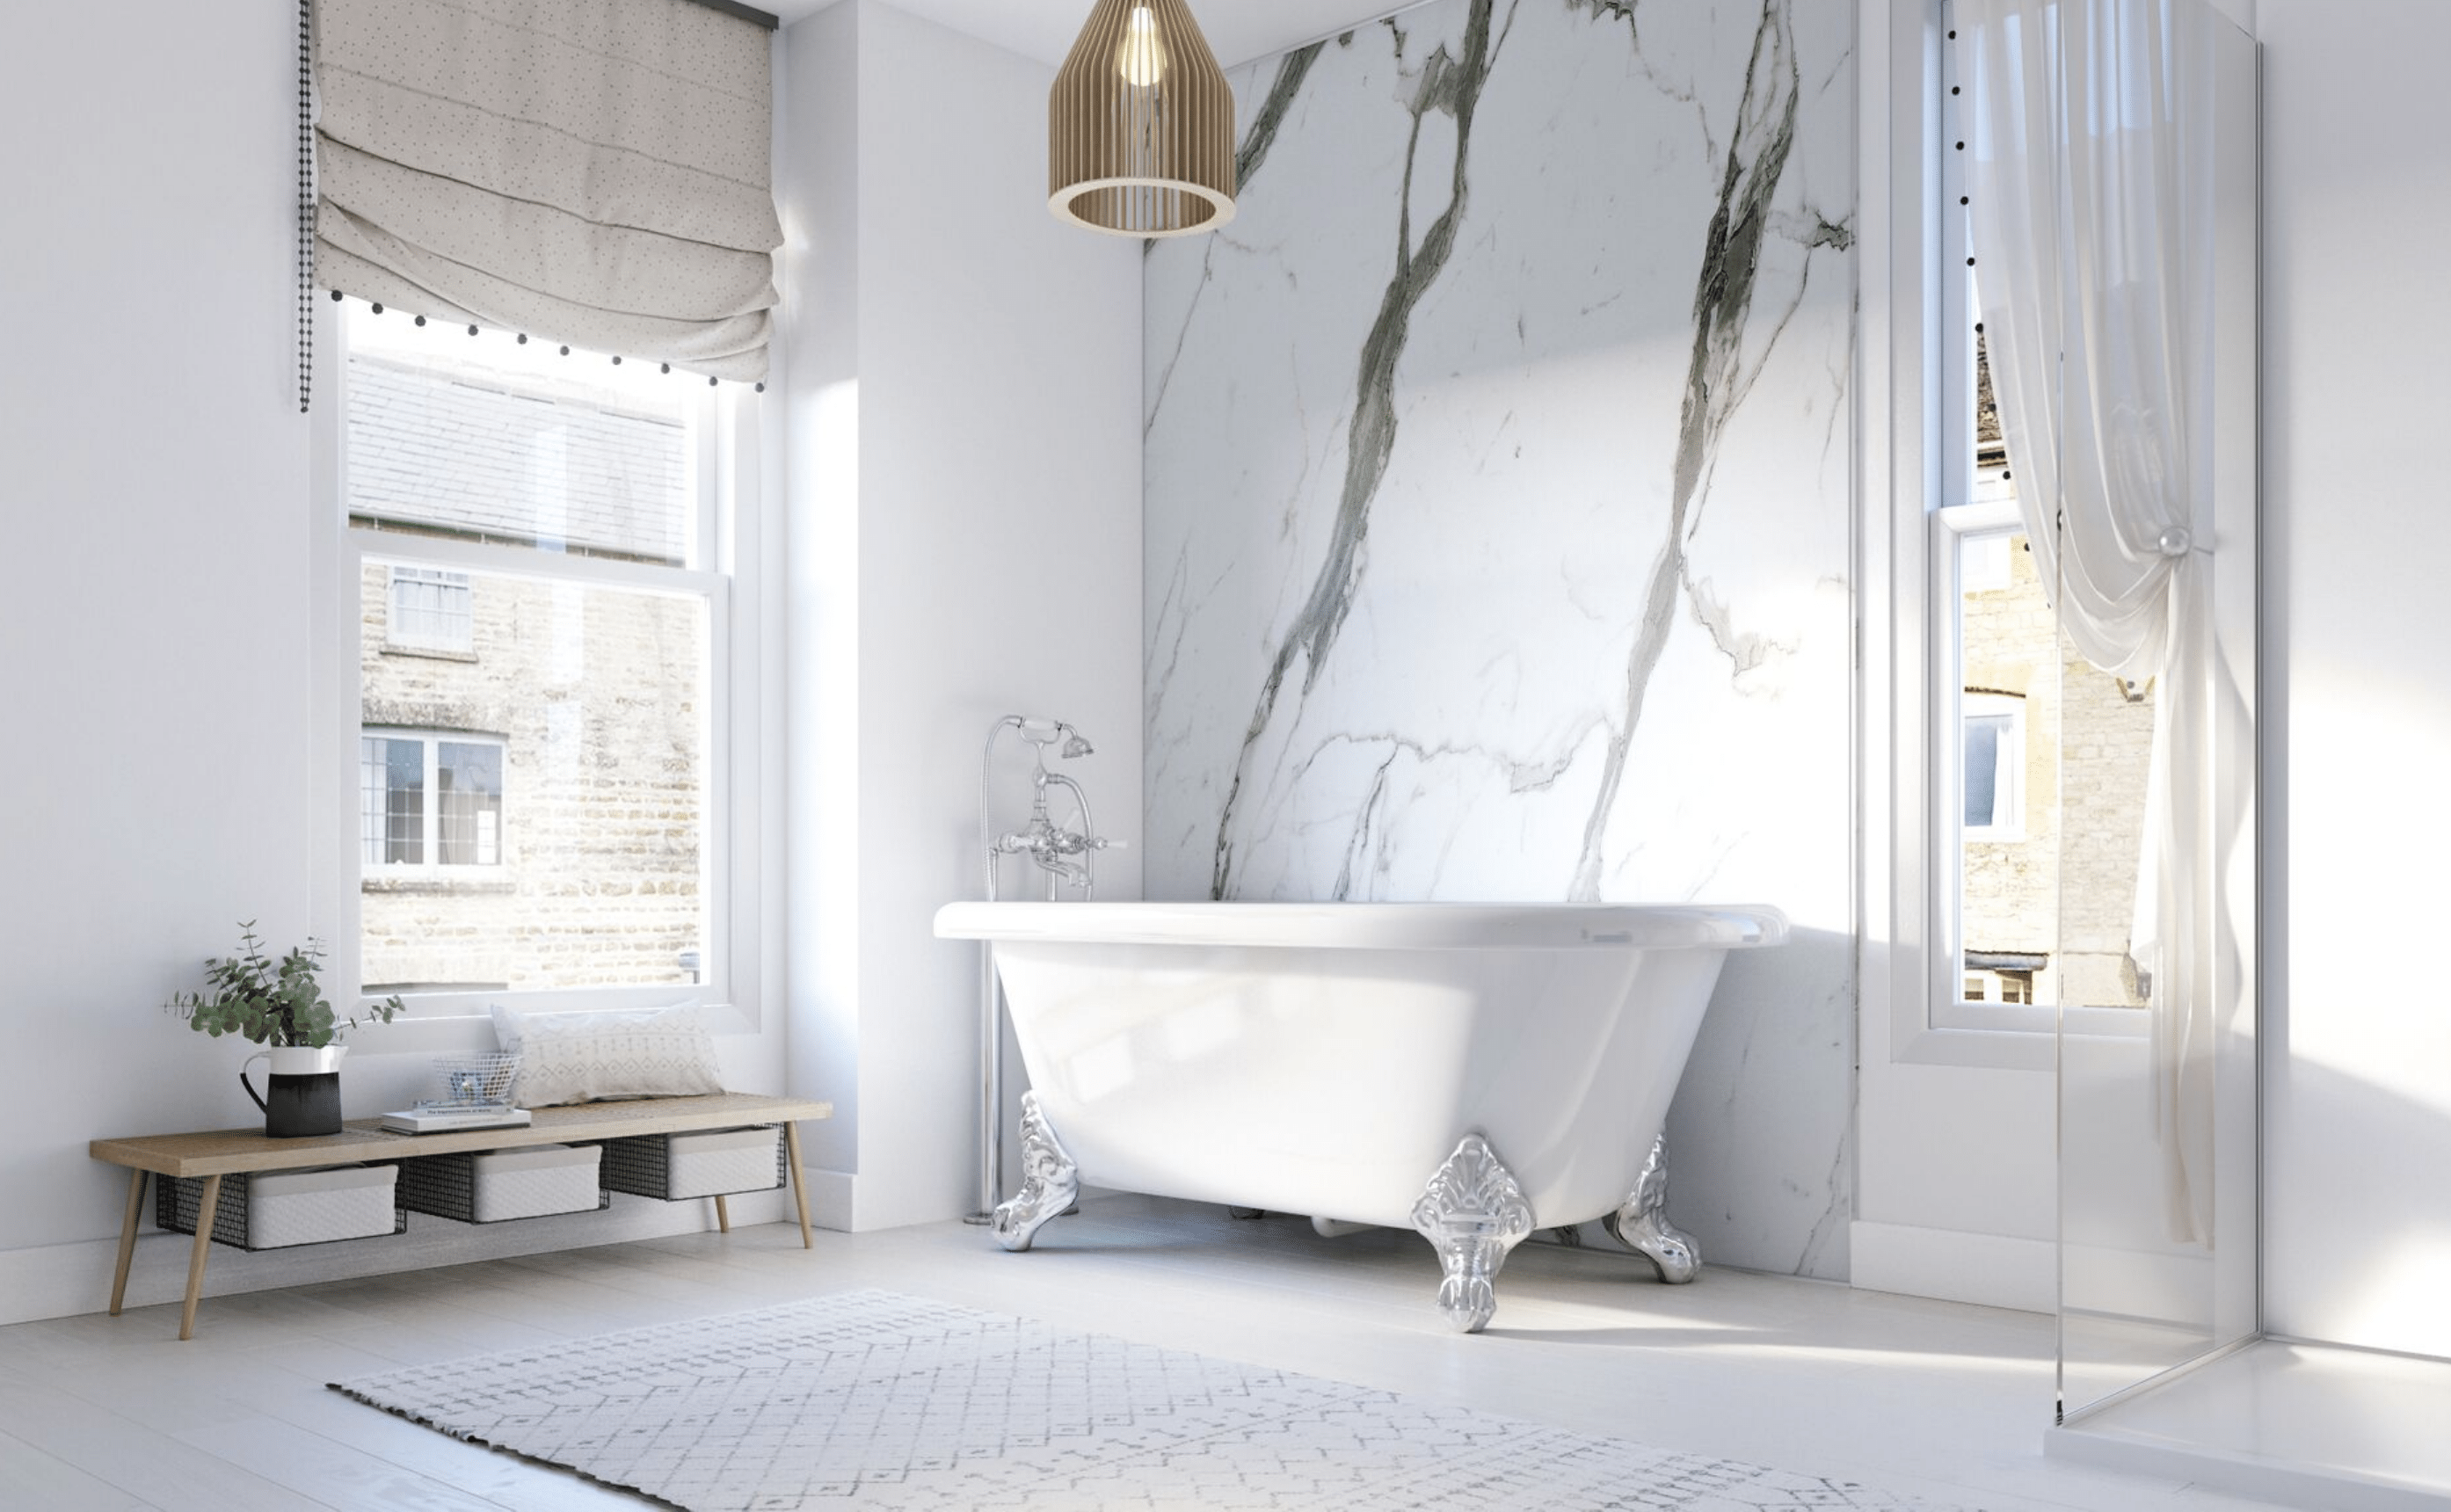 The Biggest Bathroom Trend For 2019 by interior styist and lifestyle blogger Maxine Brady from www.welovehomeblog.com